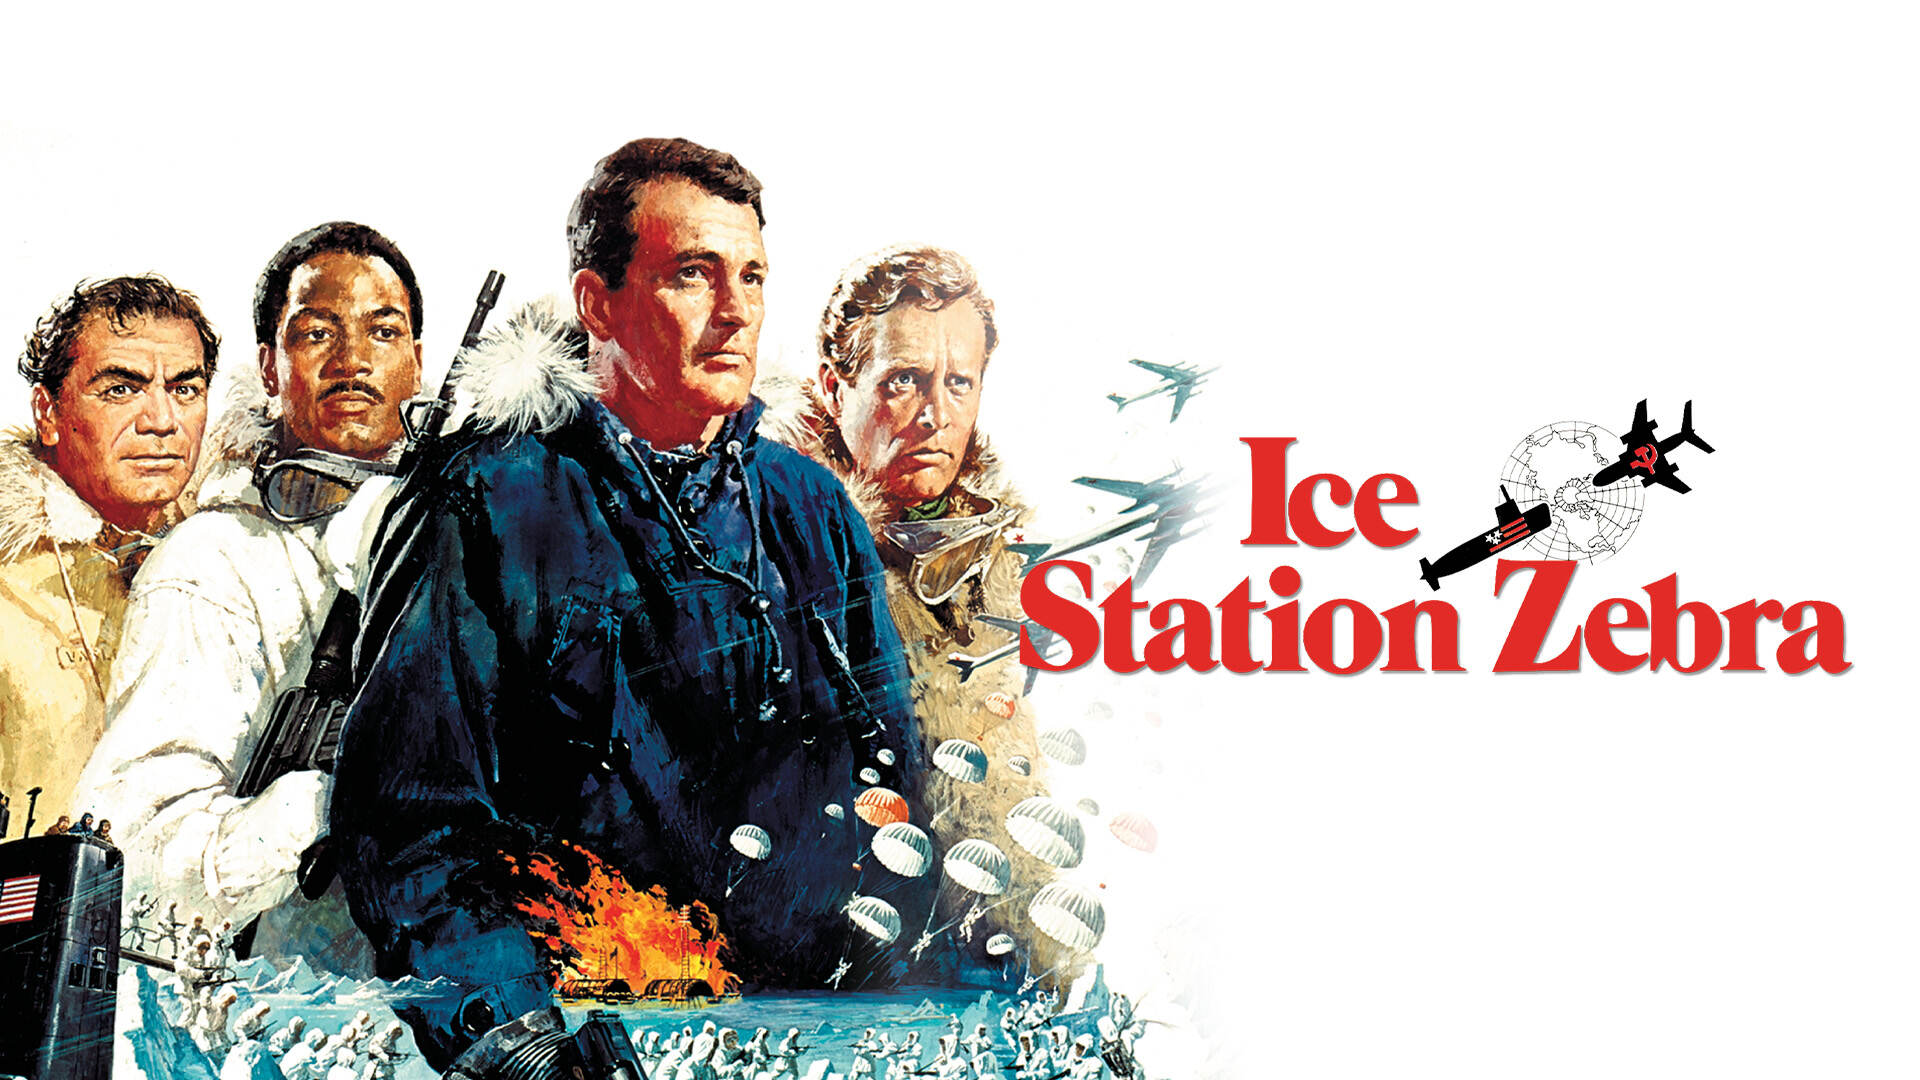 39-facts-about-the-movie-ice-station-zebra